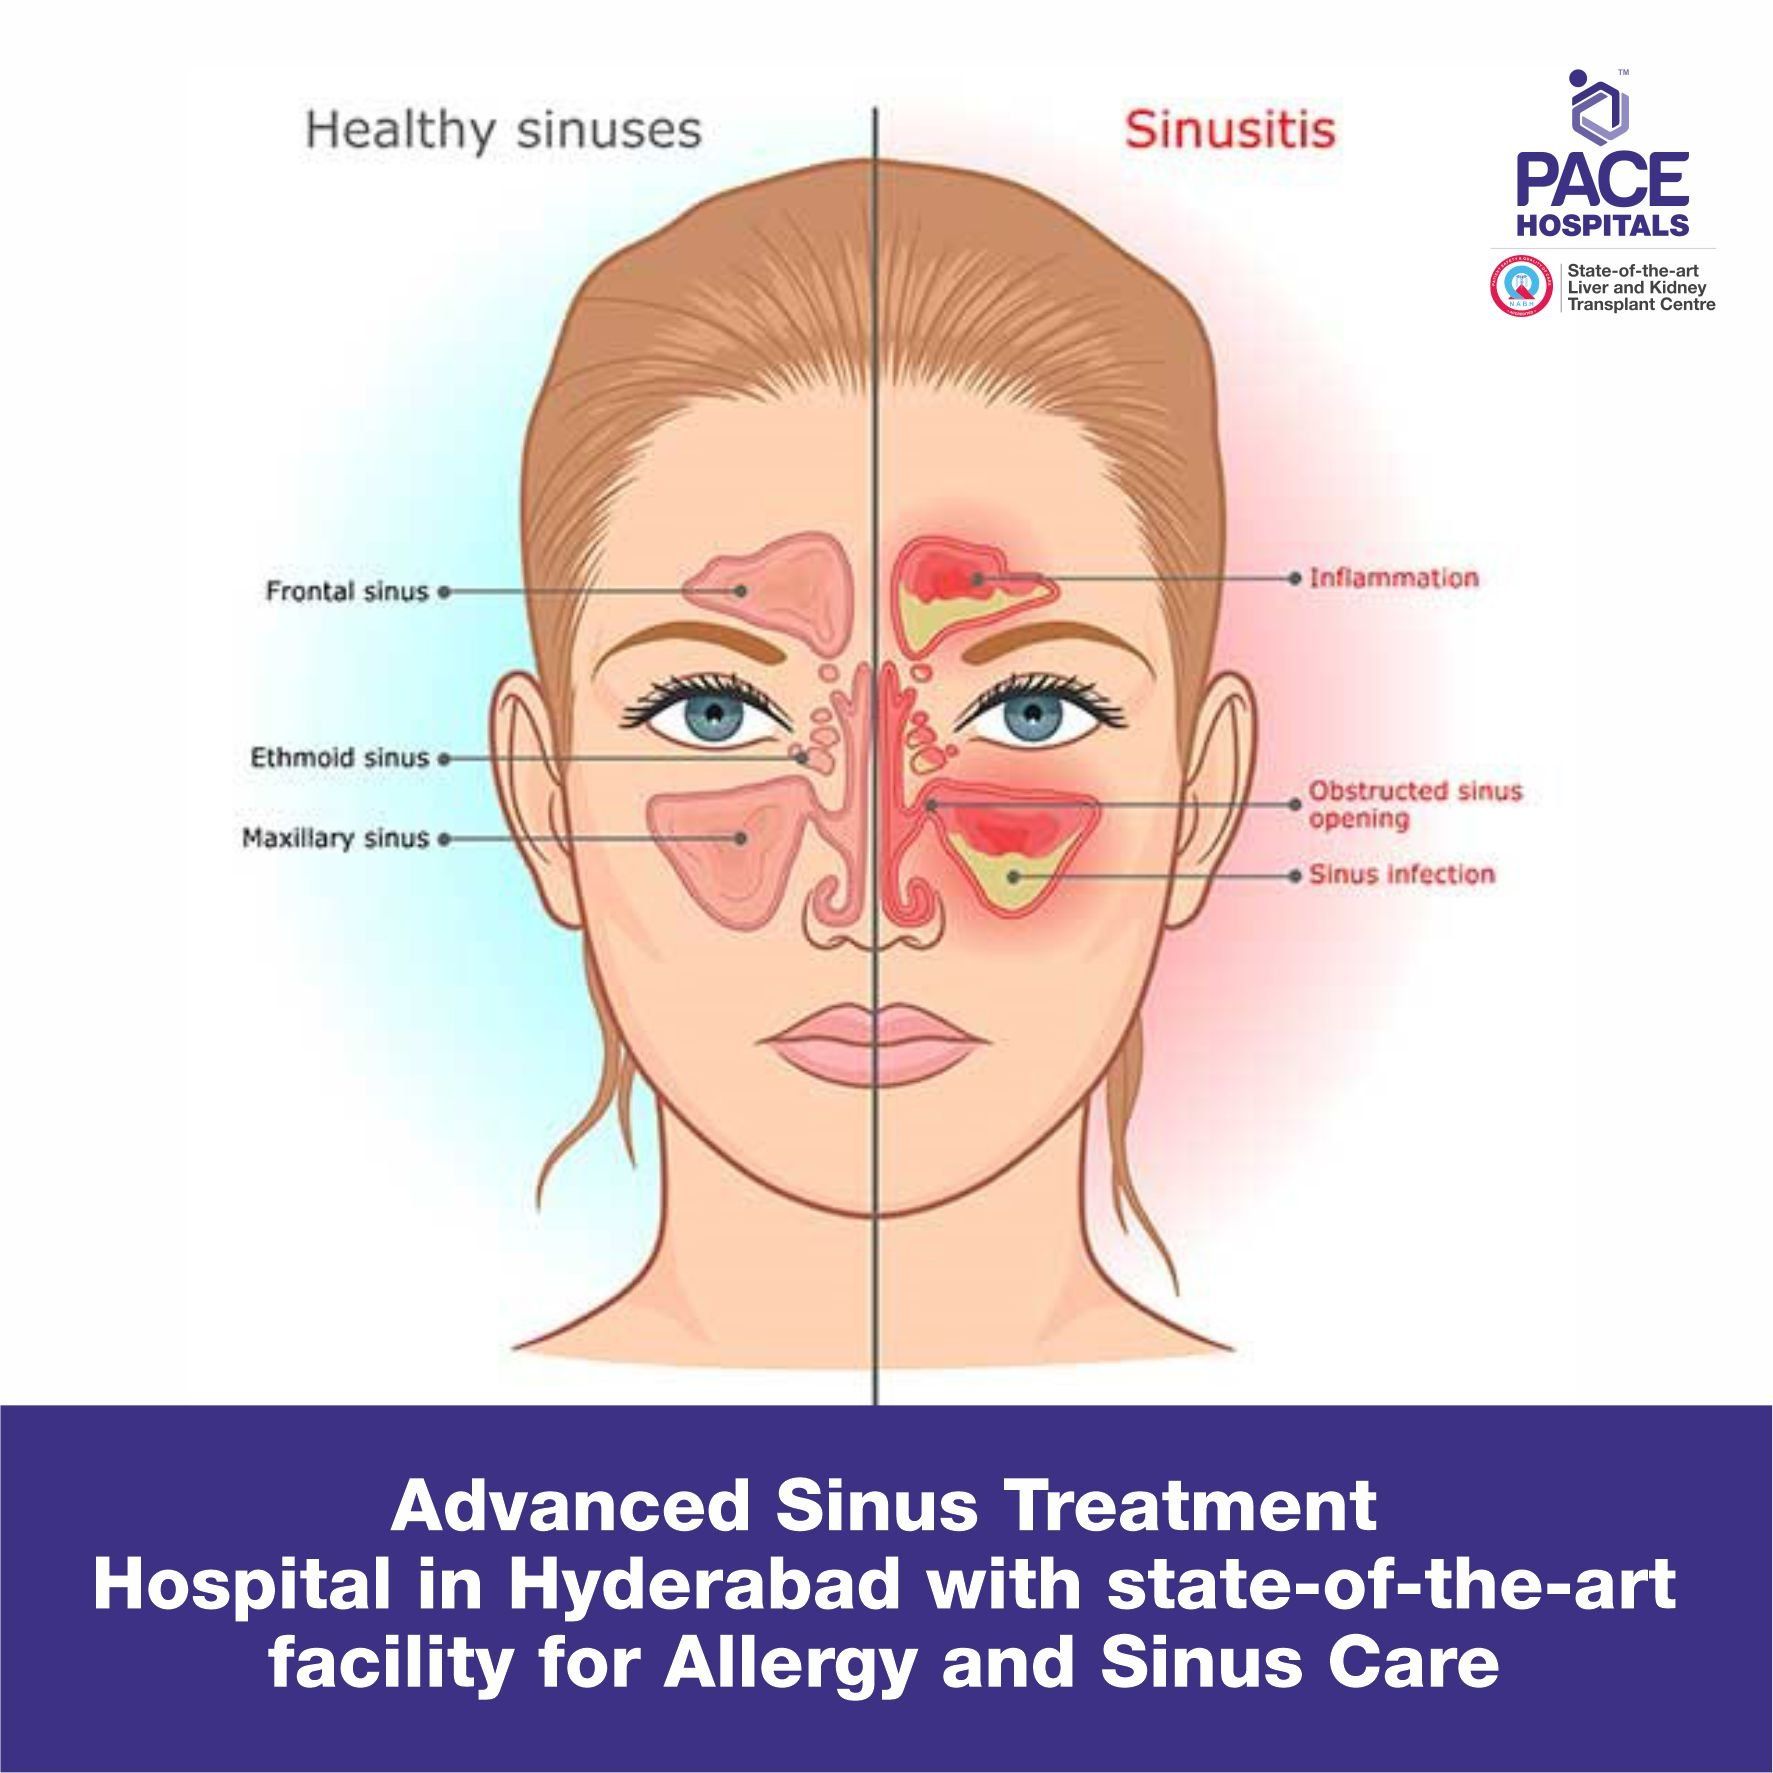 Advanced Sinus Treatment Hospital in Hyderabad with state-of-the-art-facility for Allergy and Sinus Care - Sinus Infections Treatment in Hyderabad